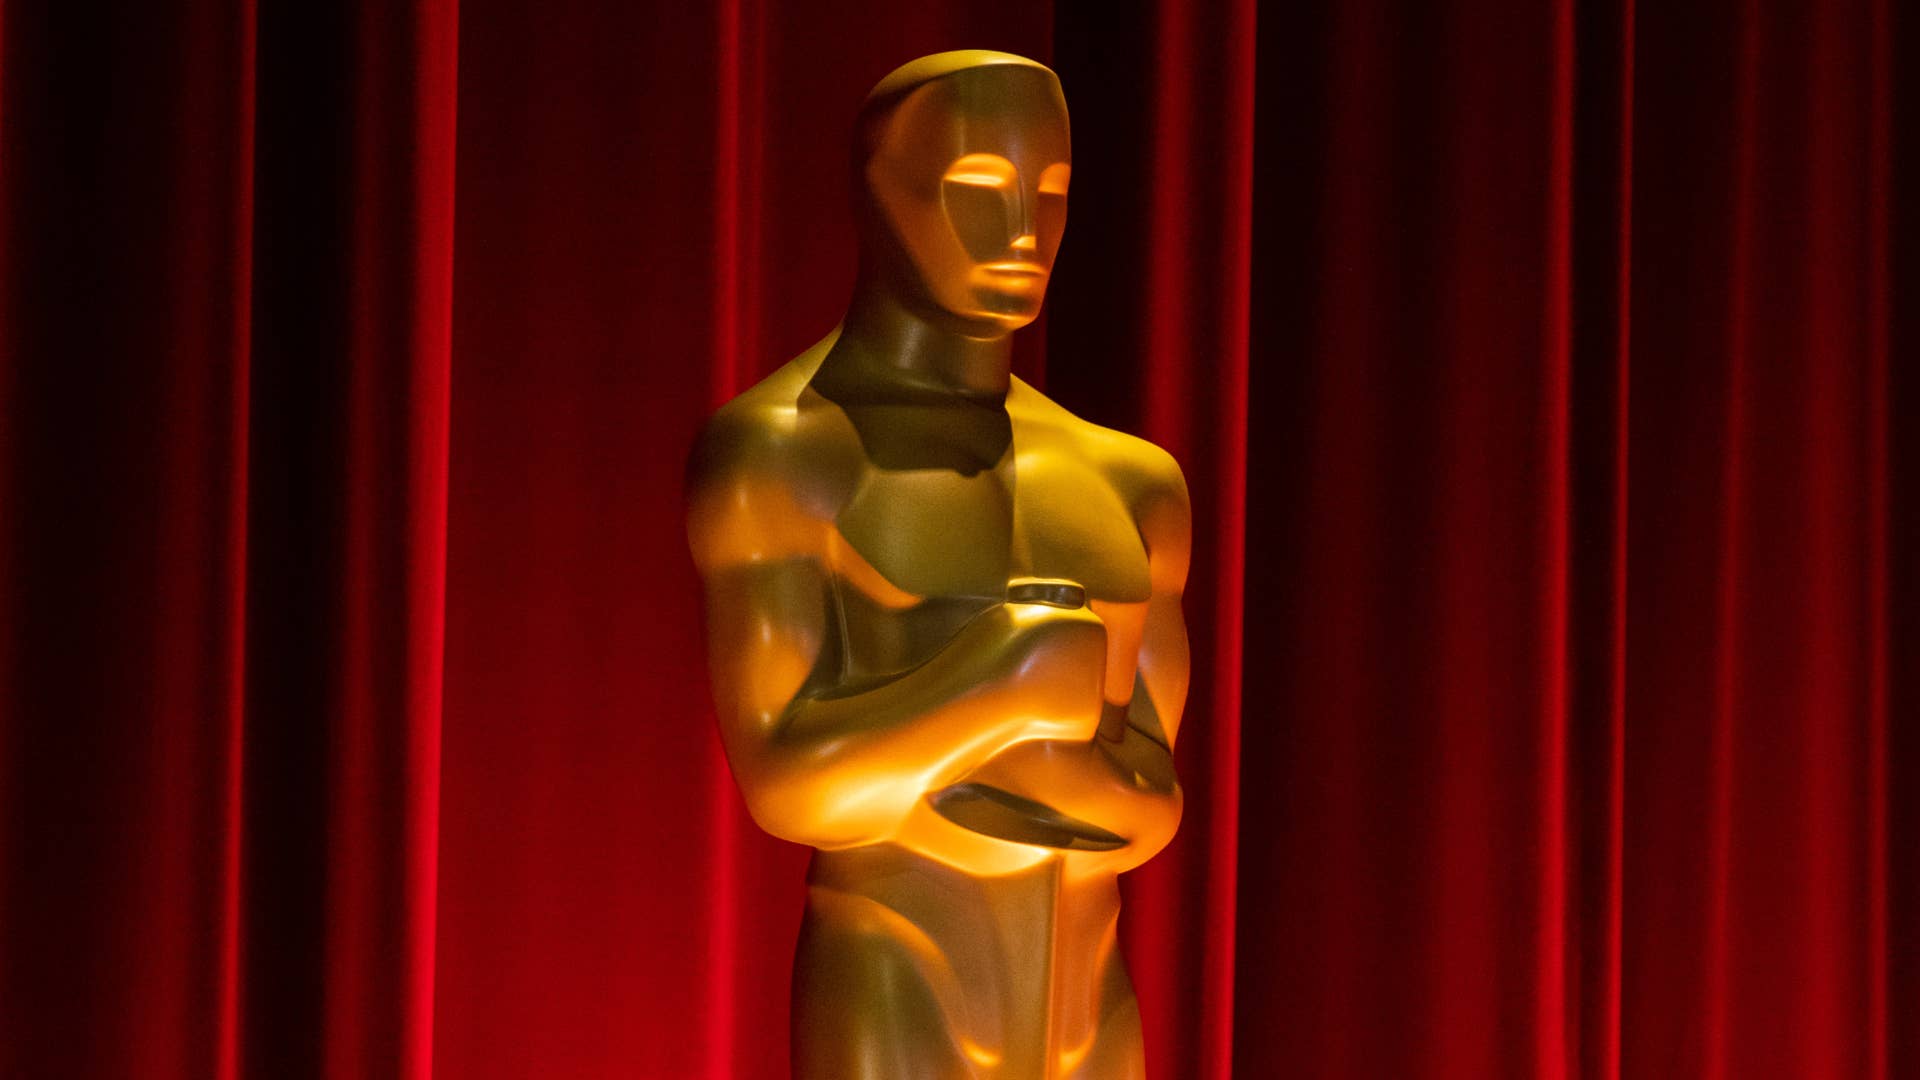 Oscars trophy is pictured in front of red background